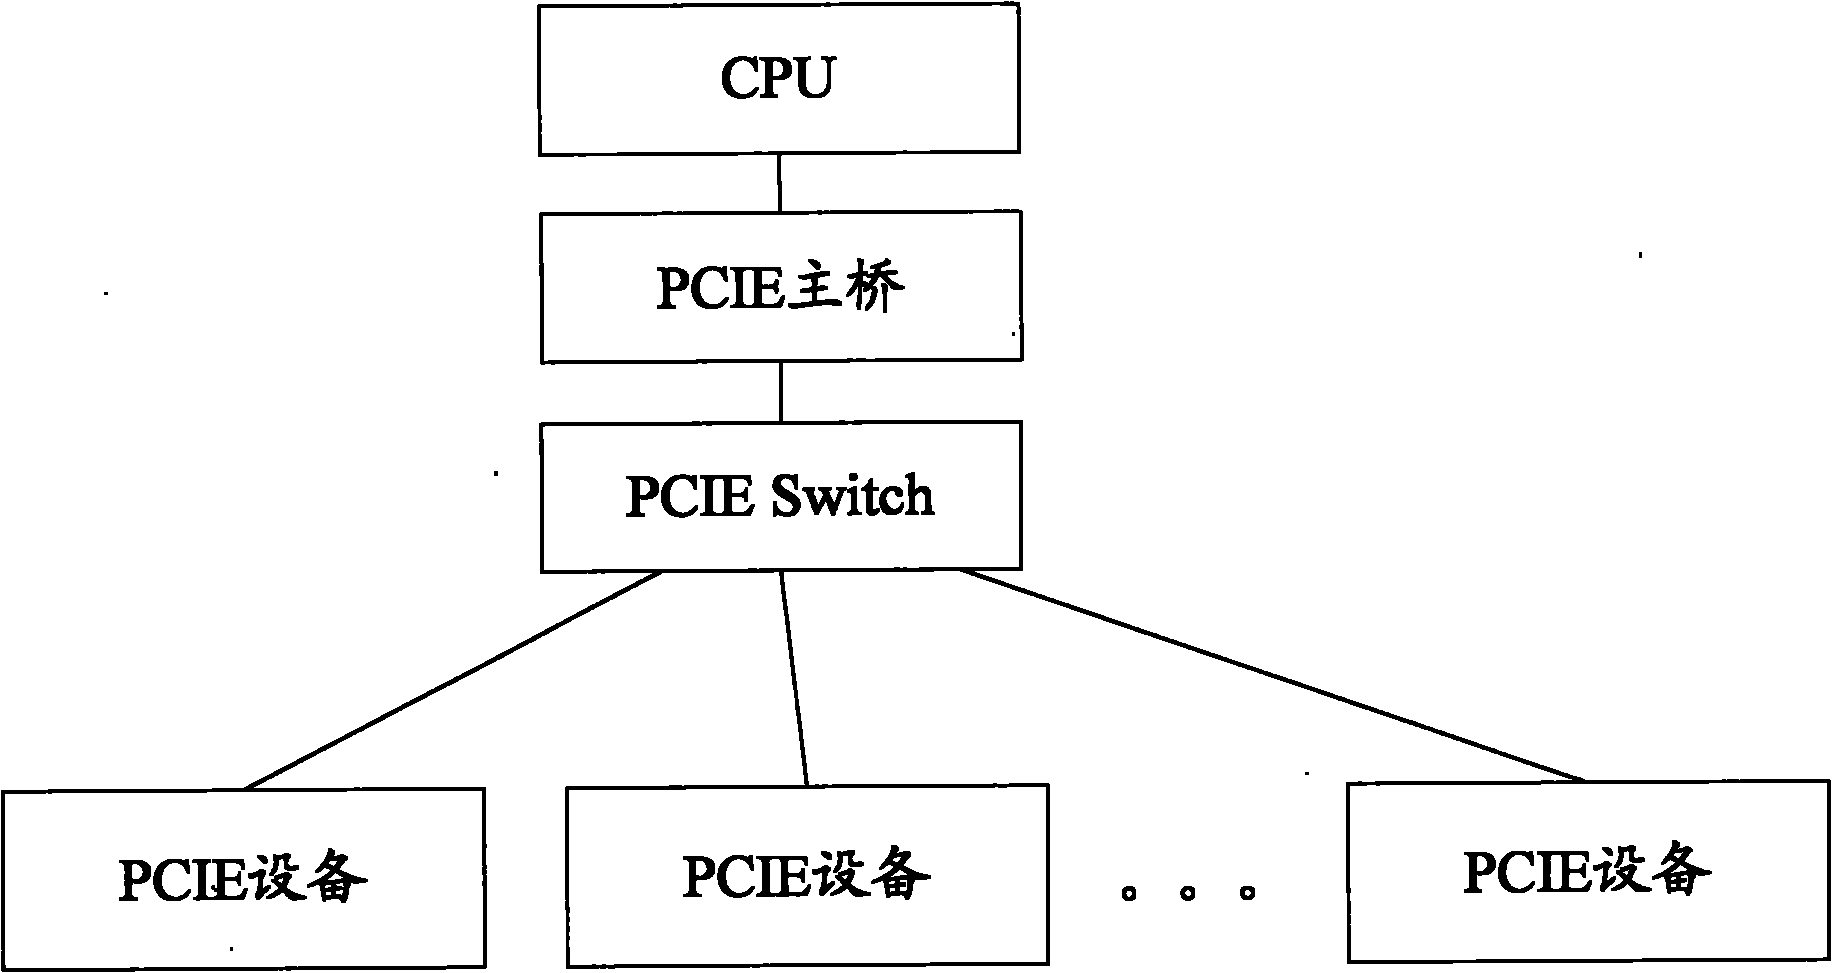 Interrupt processing method of multi-PCIE (Peripheral Component Interface Express) equipment system